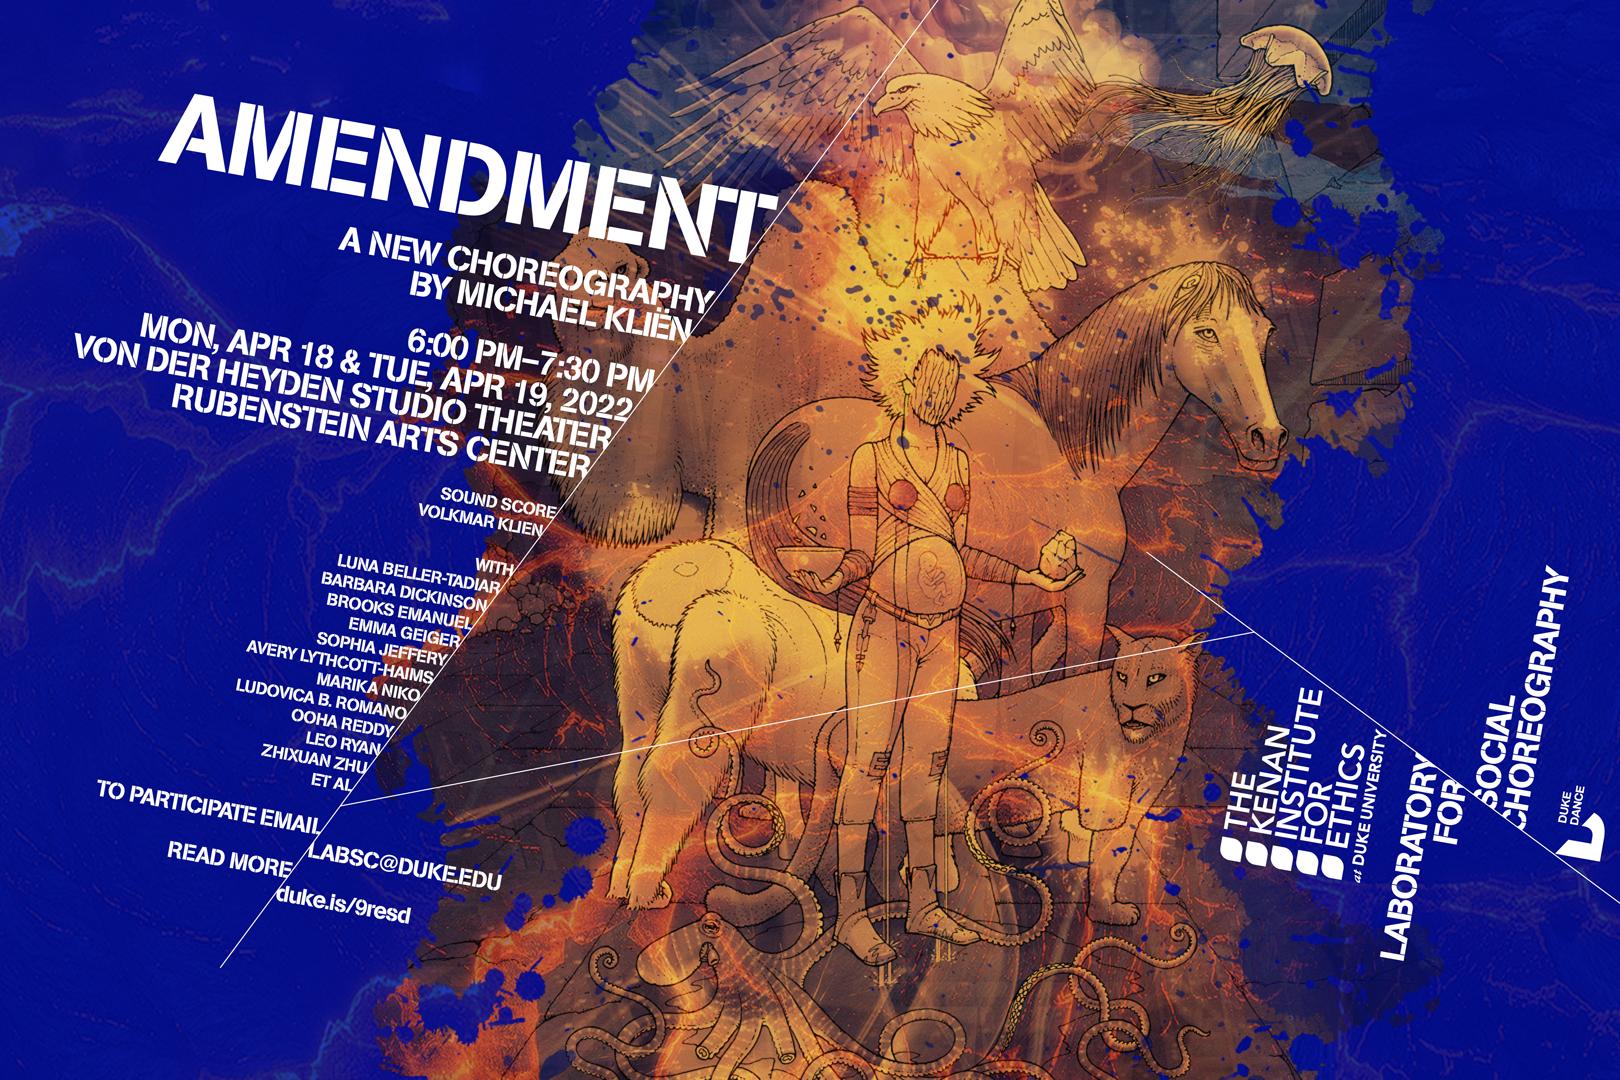 Comic or manga-style illustration of a pregnant person surrounded by animals. Flyer text reads: AMENDMENT A New Choreographic Work by Michael Kliën 6–7:30 p.m. Mon, April 18 and Tues, April 19, 2022 von der Heyden Studio Theater Rubenstein Arts Center, Duke University